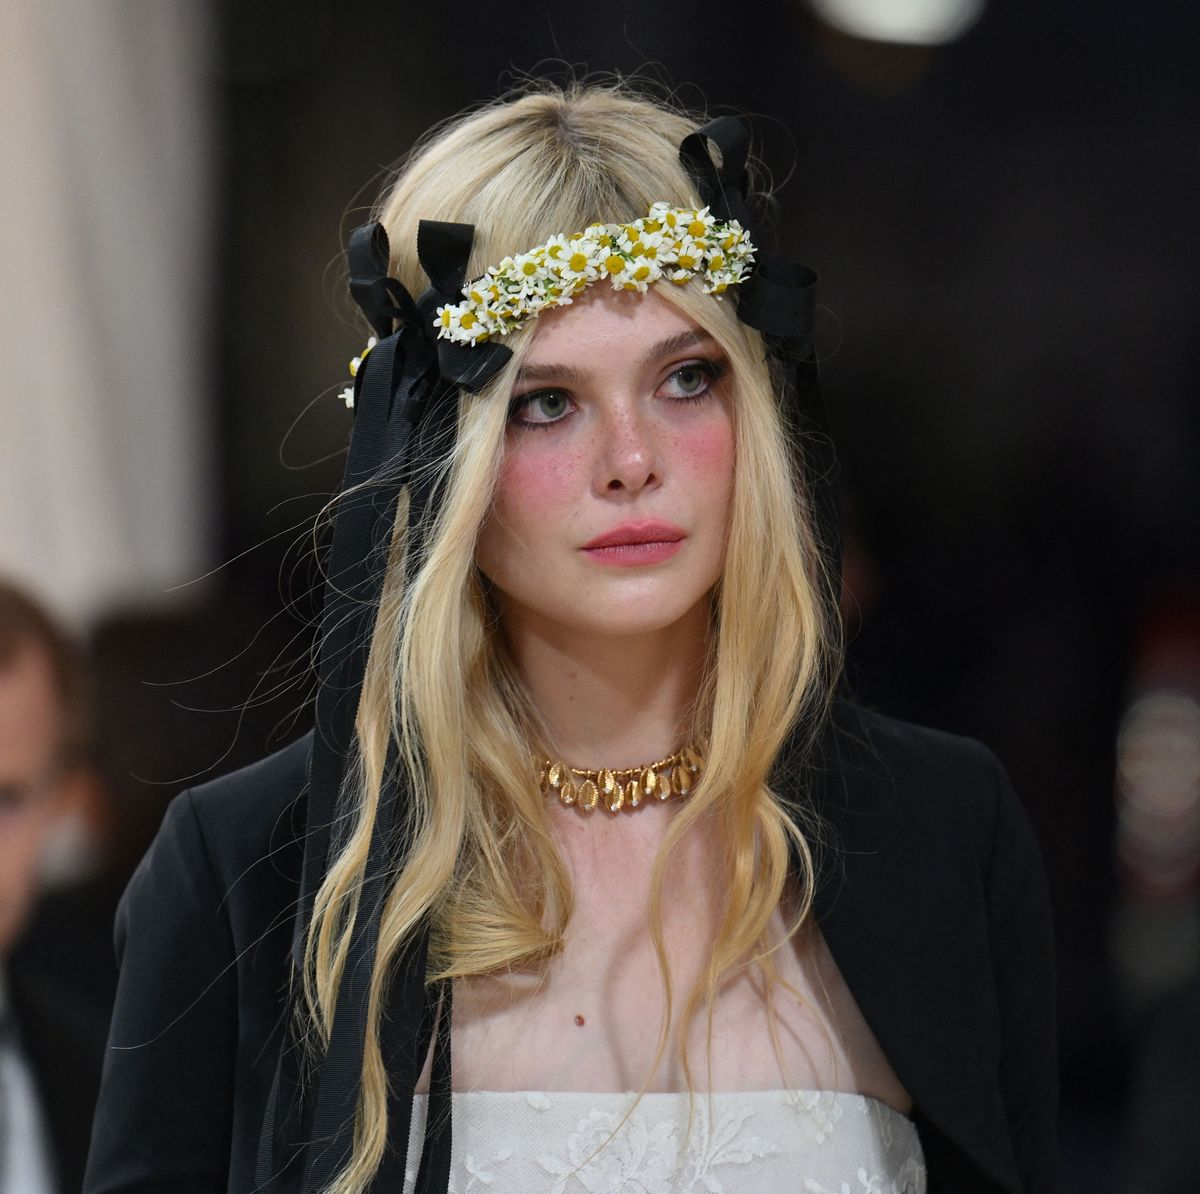 Elle Fanning Says She Lost Role to Actress With More Instagram